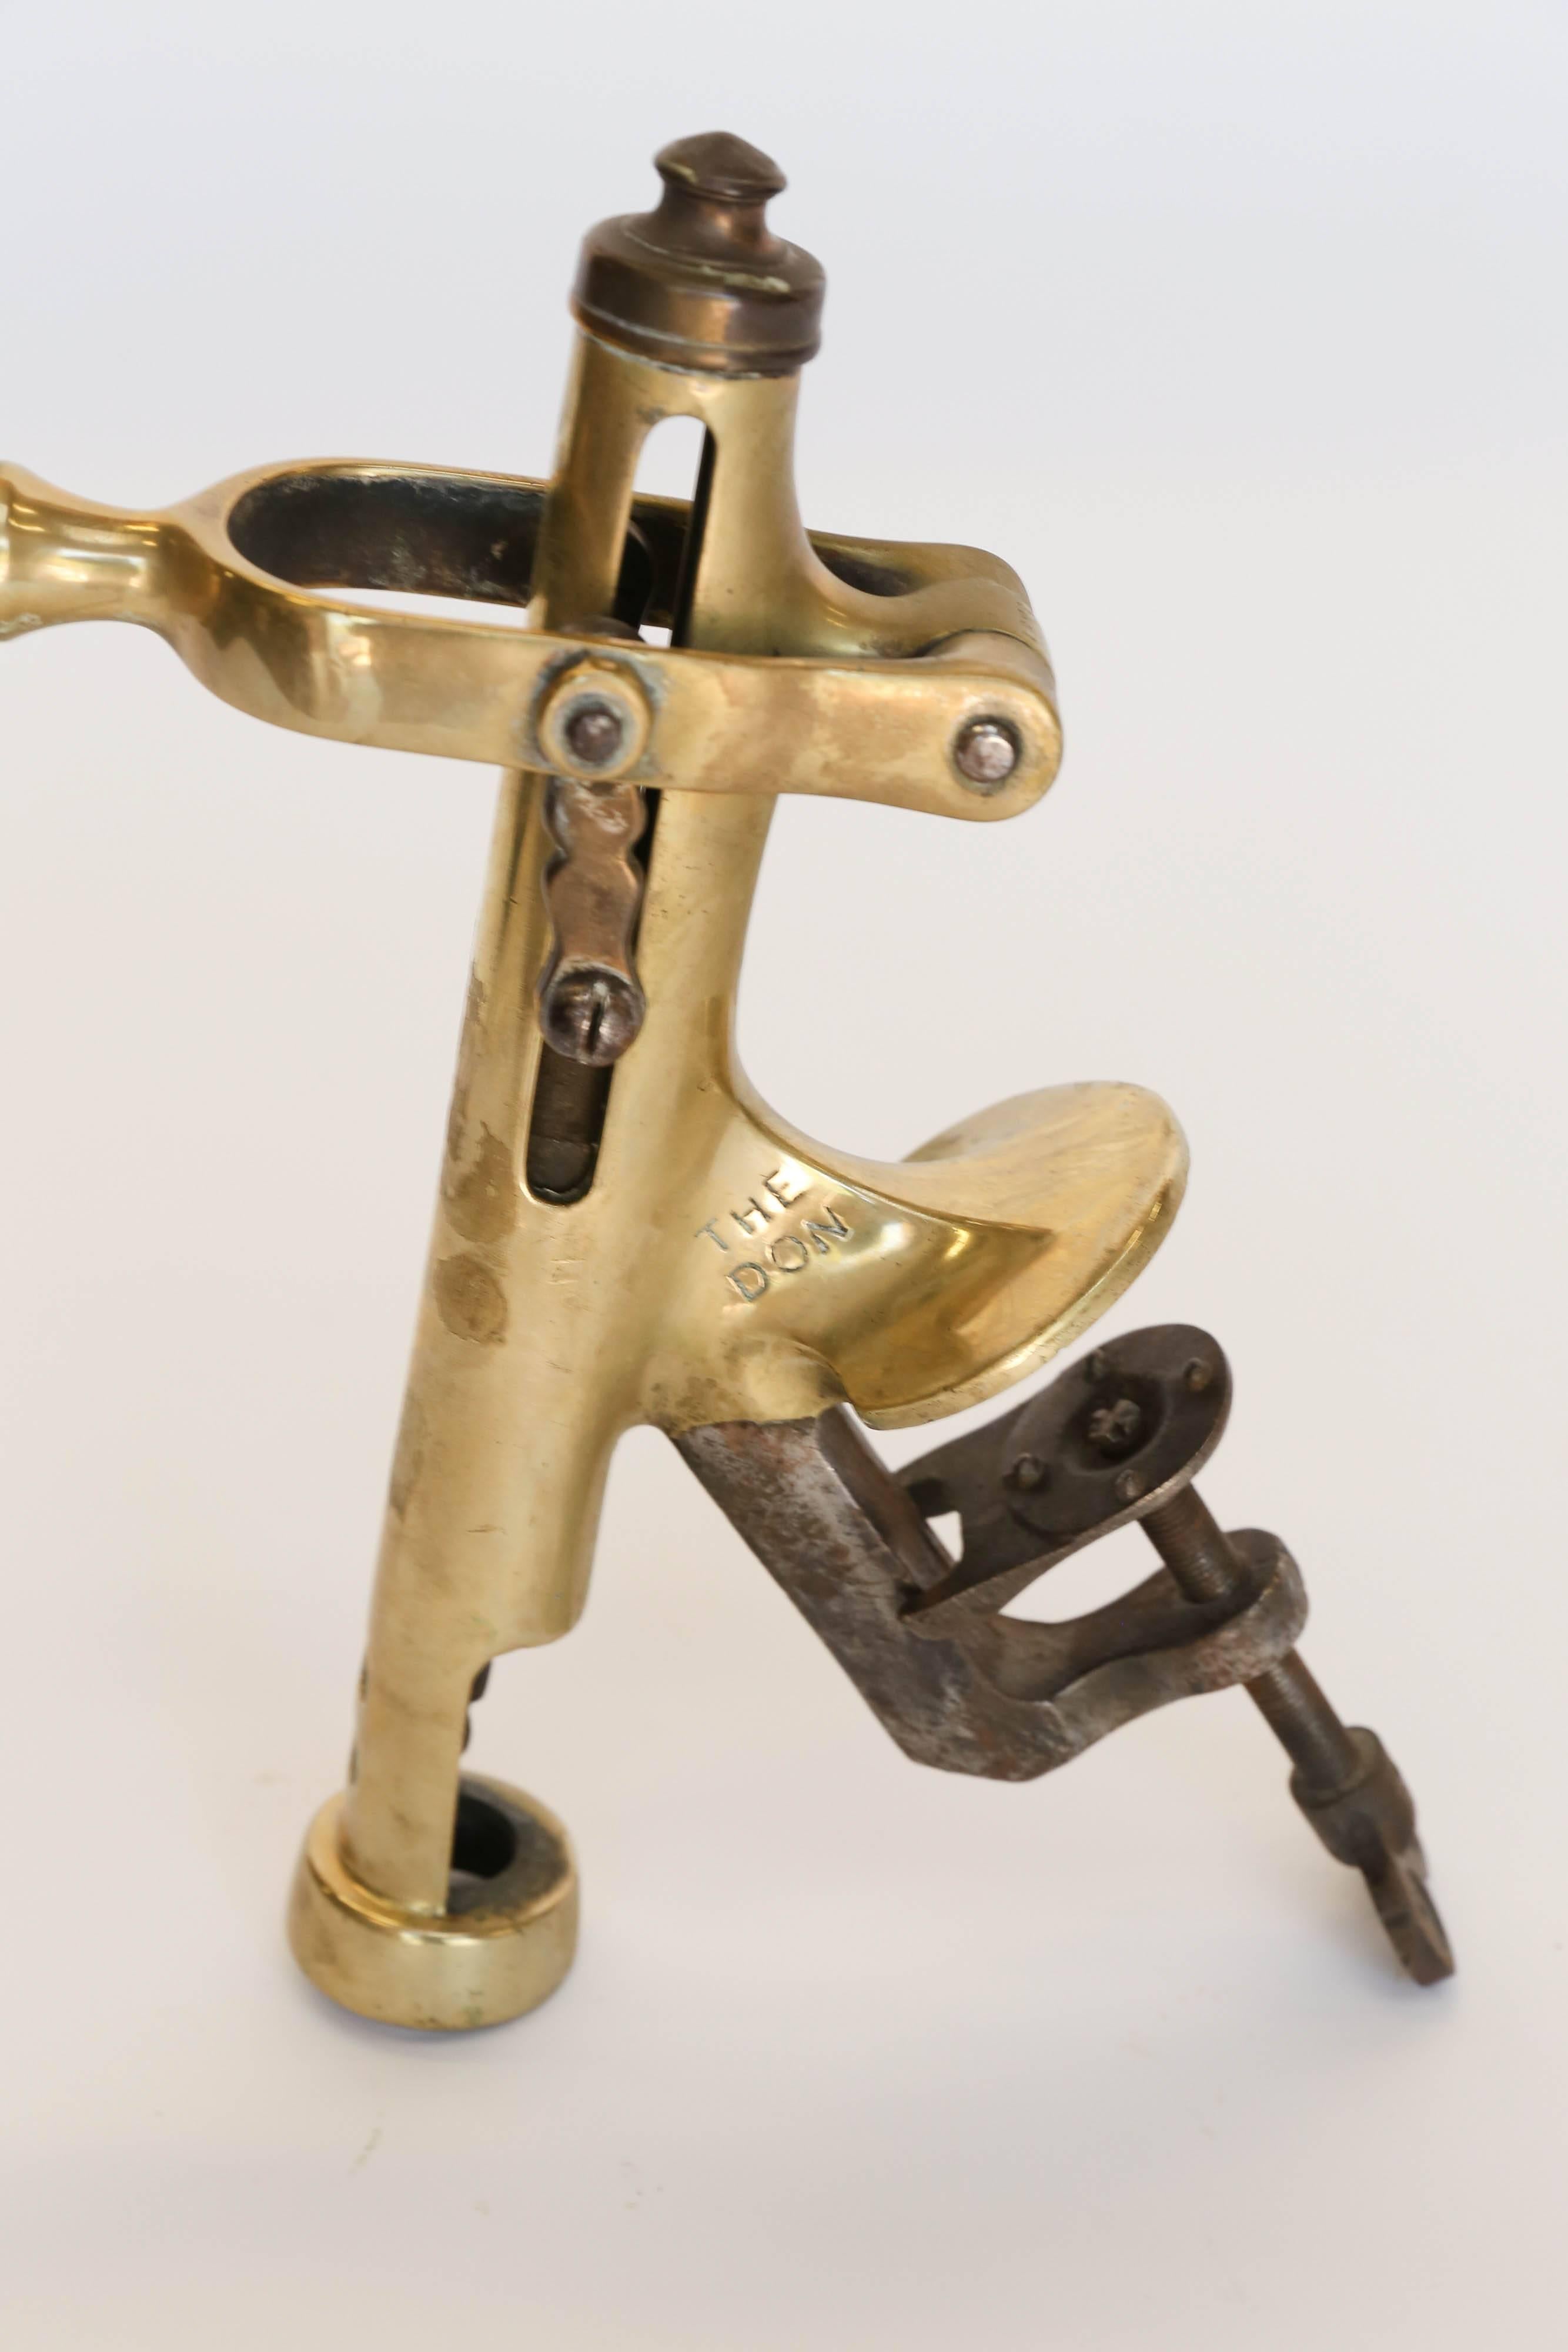 Vintage Brass Cork Screw Hand Crank Wine Bottle Opener. This is a Vintage Wine Bottle Opener that can be attached to a counter or bar. Beautiful wood handle and solid brass base.